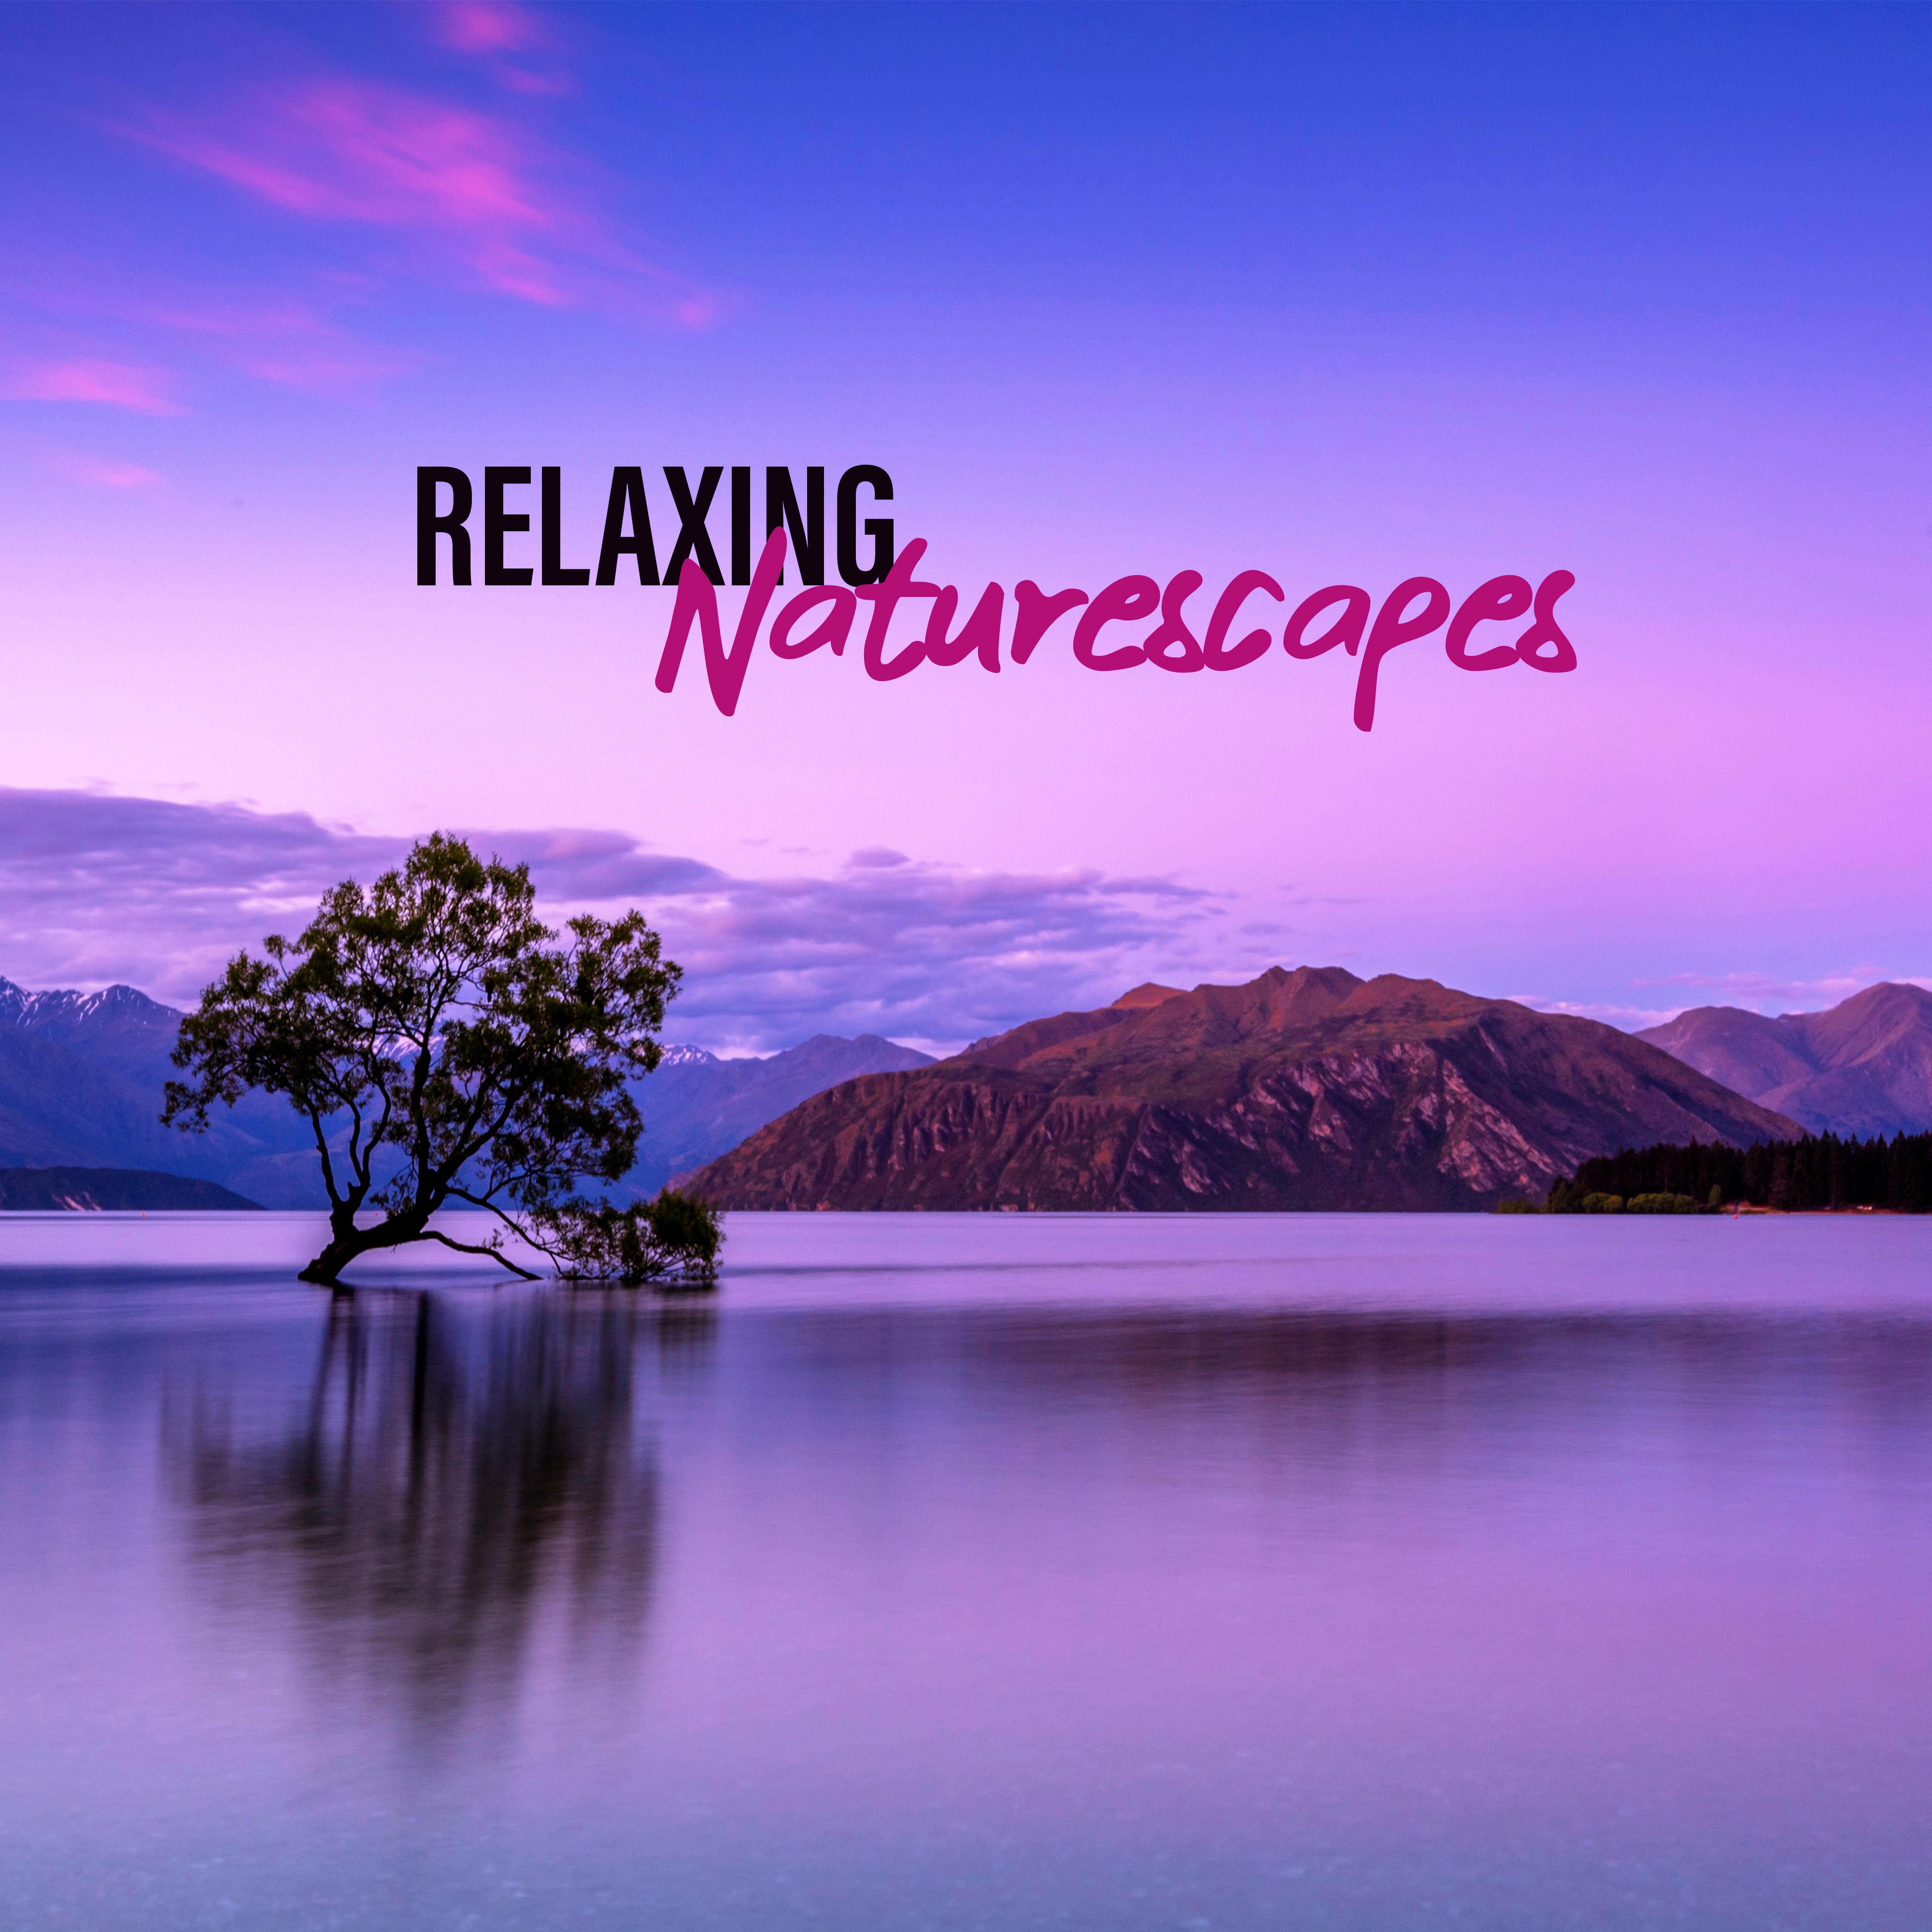 Relaxing Naturescapes  Best Relaxation Music with the Sounds of Nature